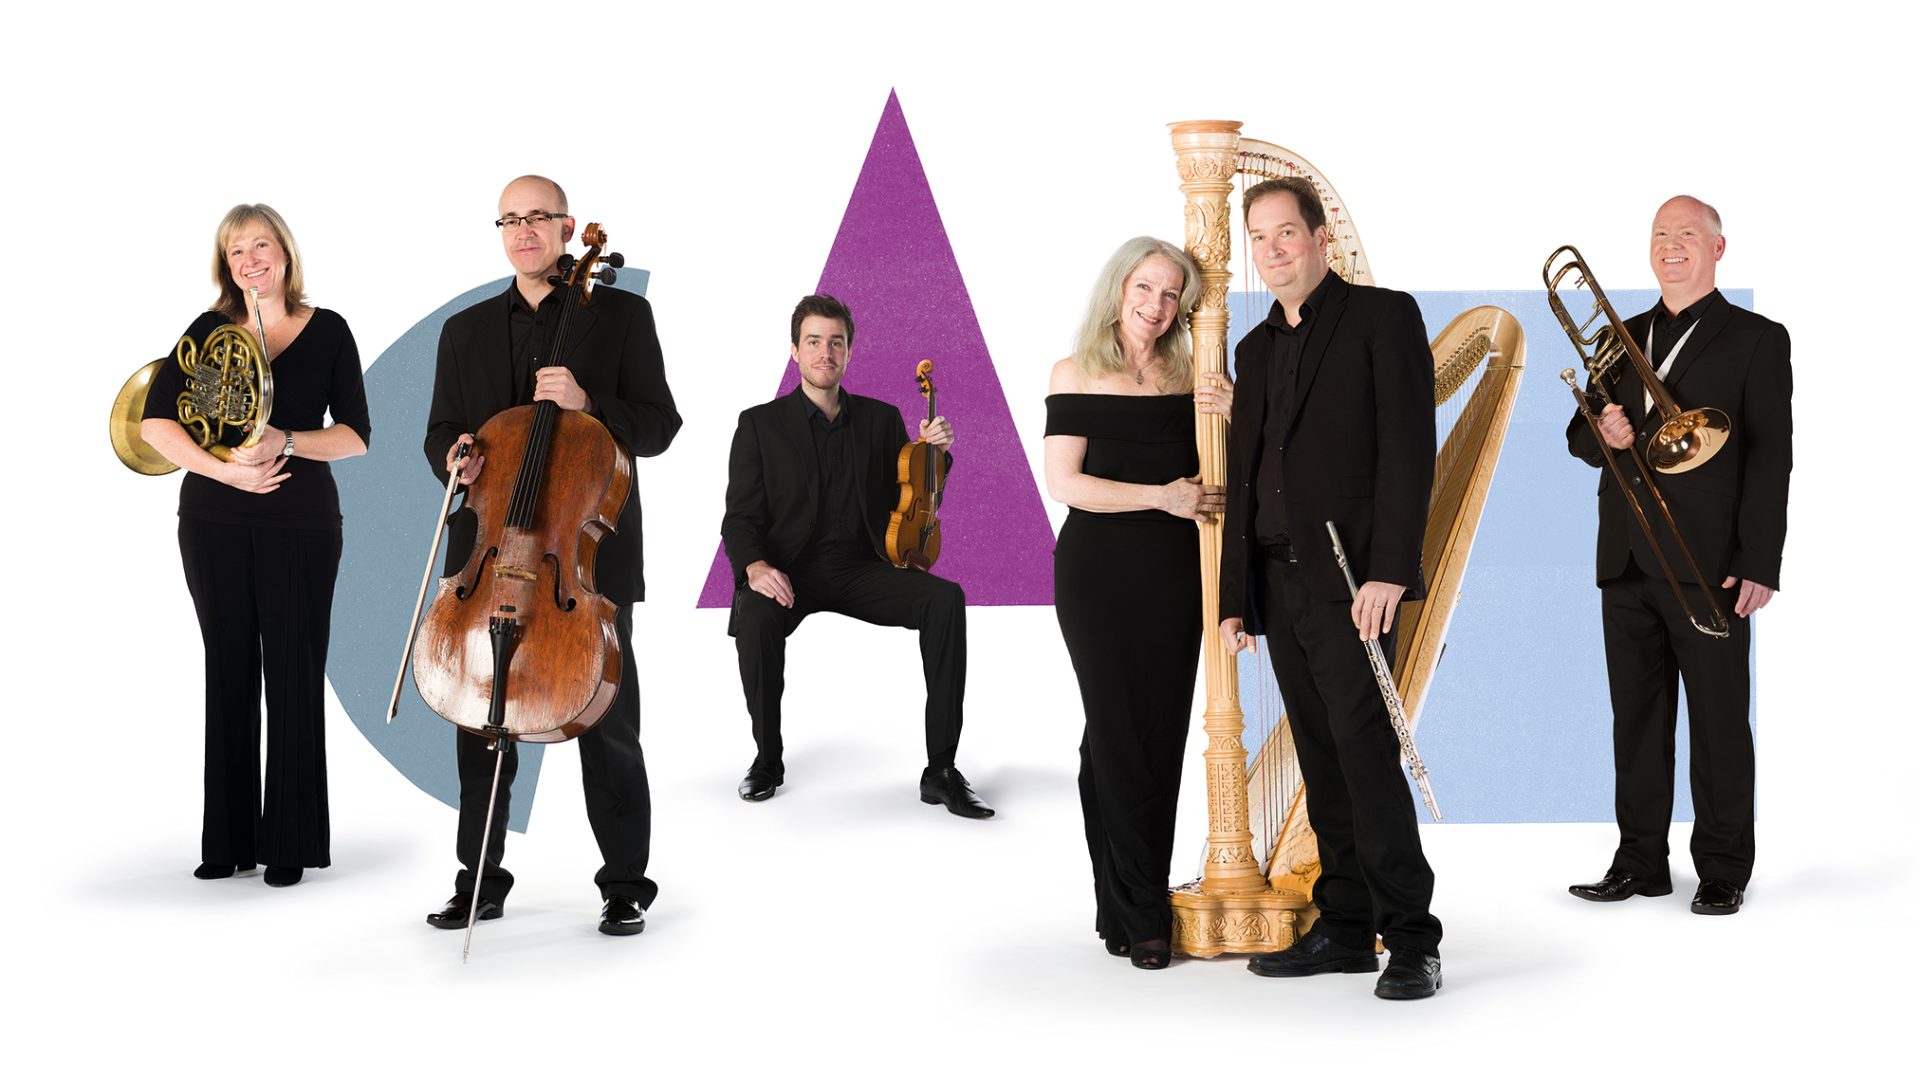 BSO French horn player, Cellist, Violist, Harpist, Flautist and Trombone player